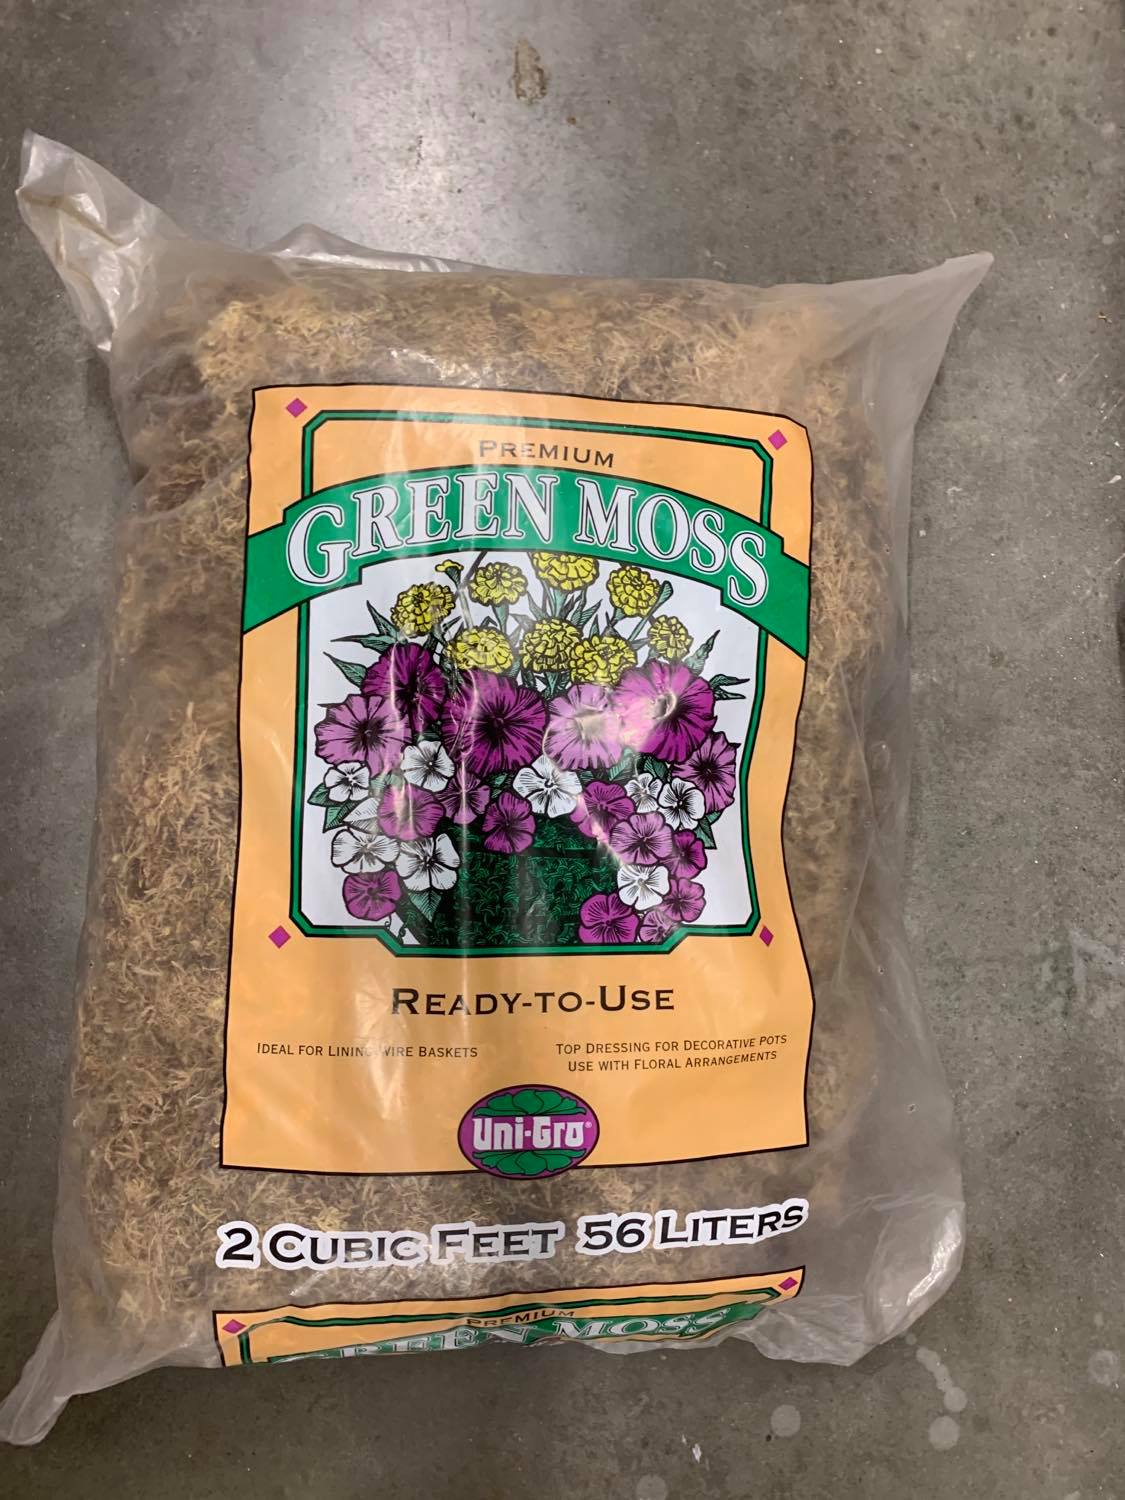 Departments - Uni-Gro Green Moss 410 cubic inches